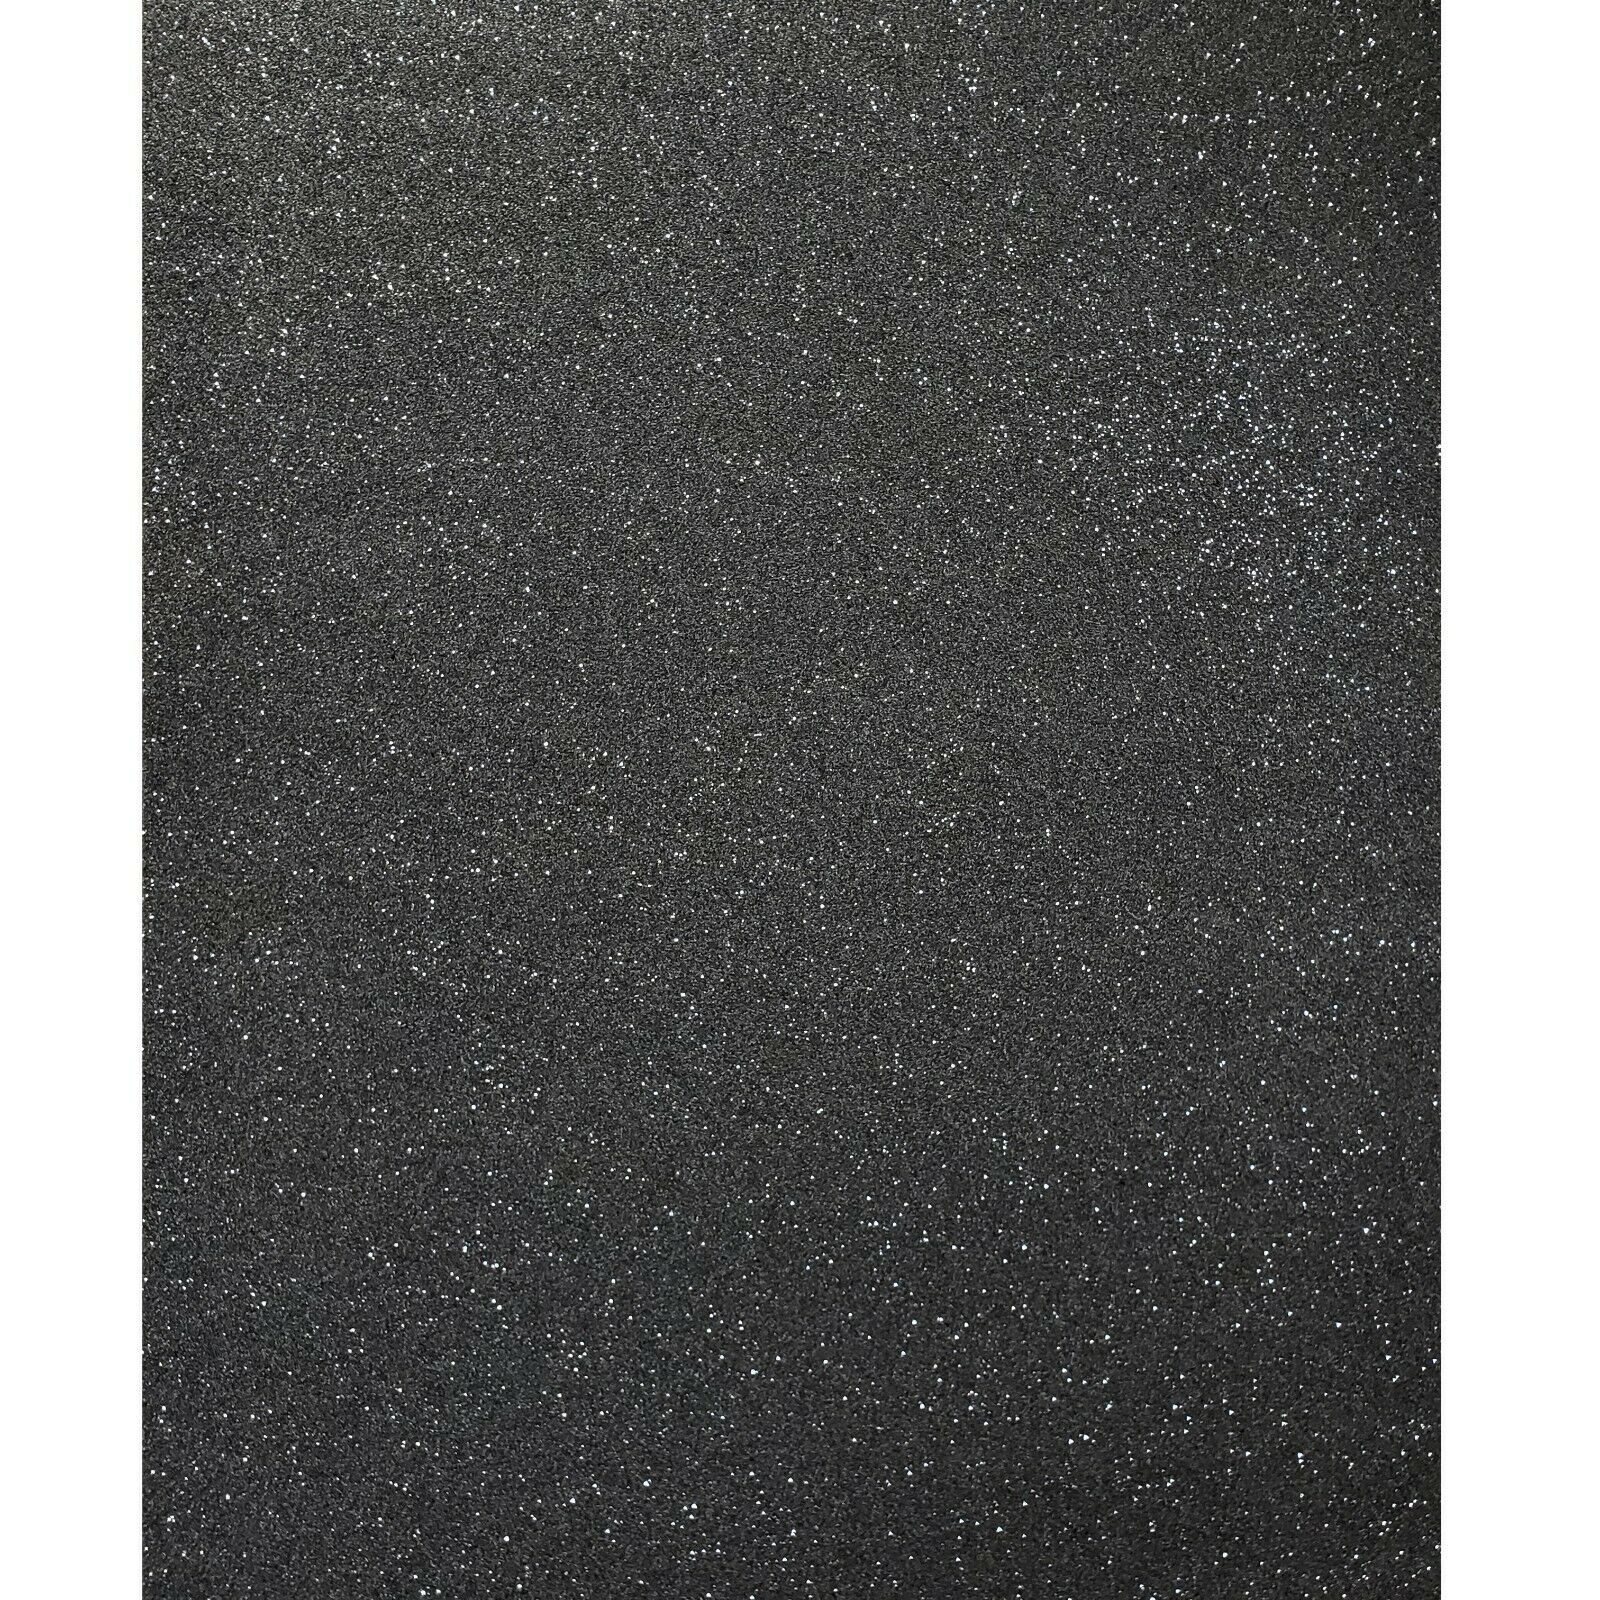 M5005 sparkle glitter charcoal gray black Chip Stone Natural real